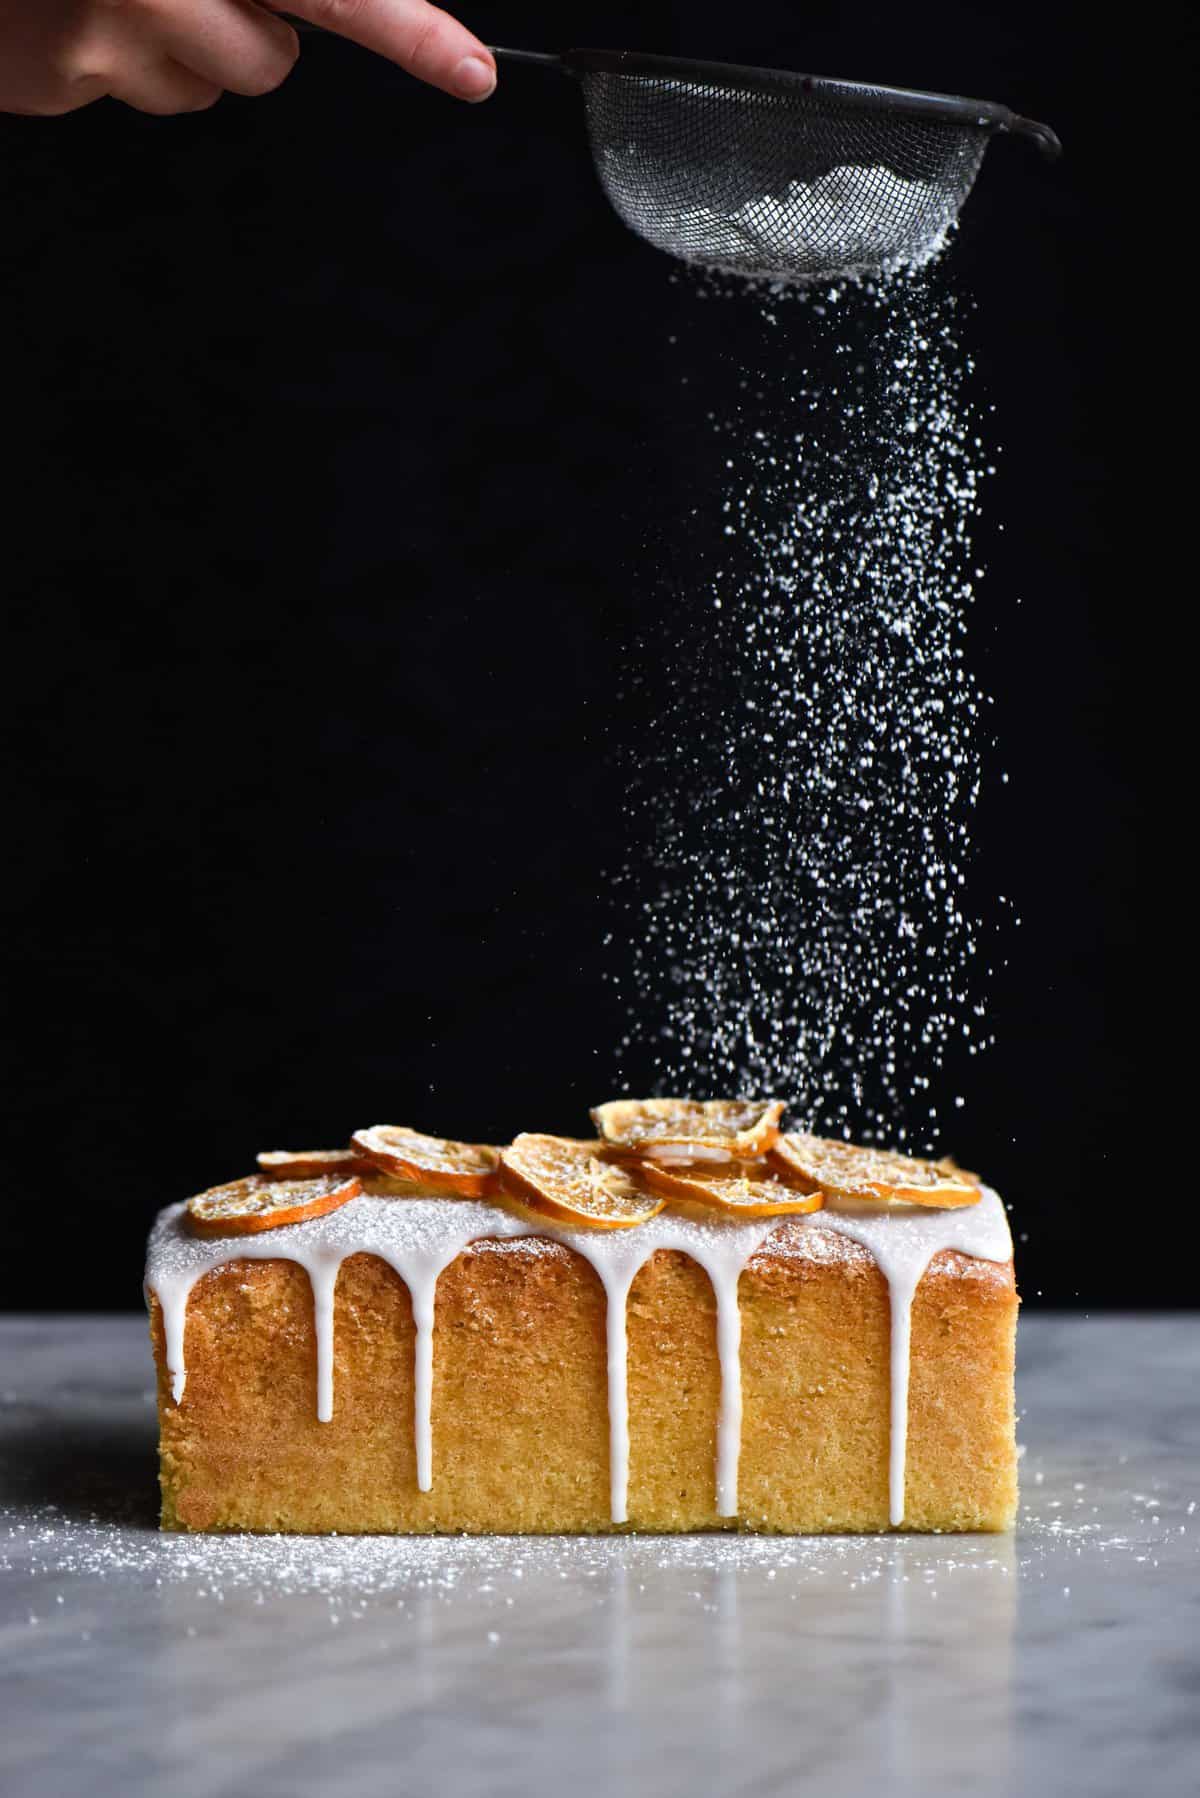 A side on view of a gluten free lemon drizzle cake being sprinkled with icing sugar